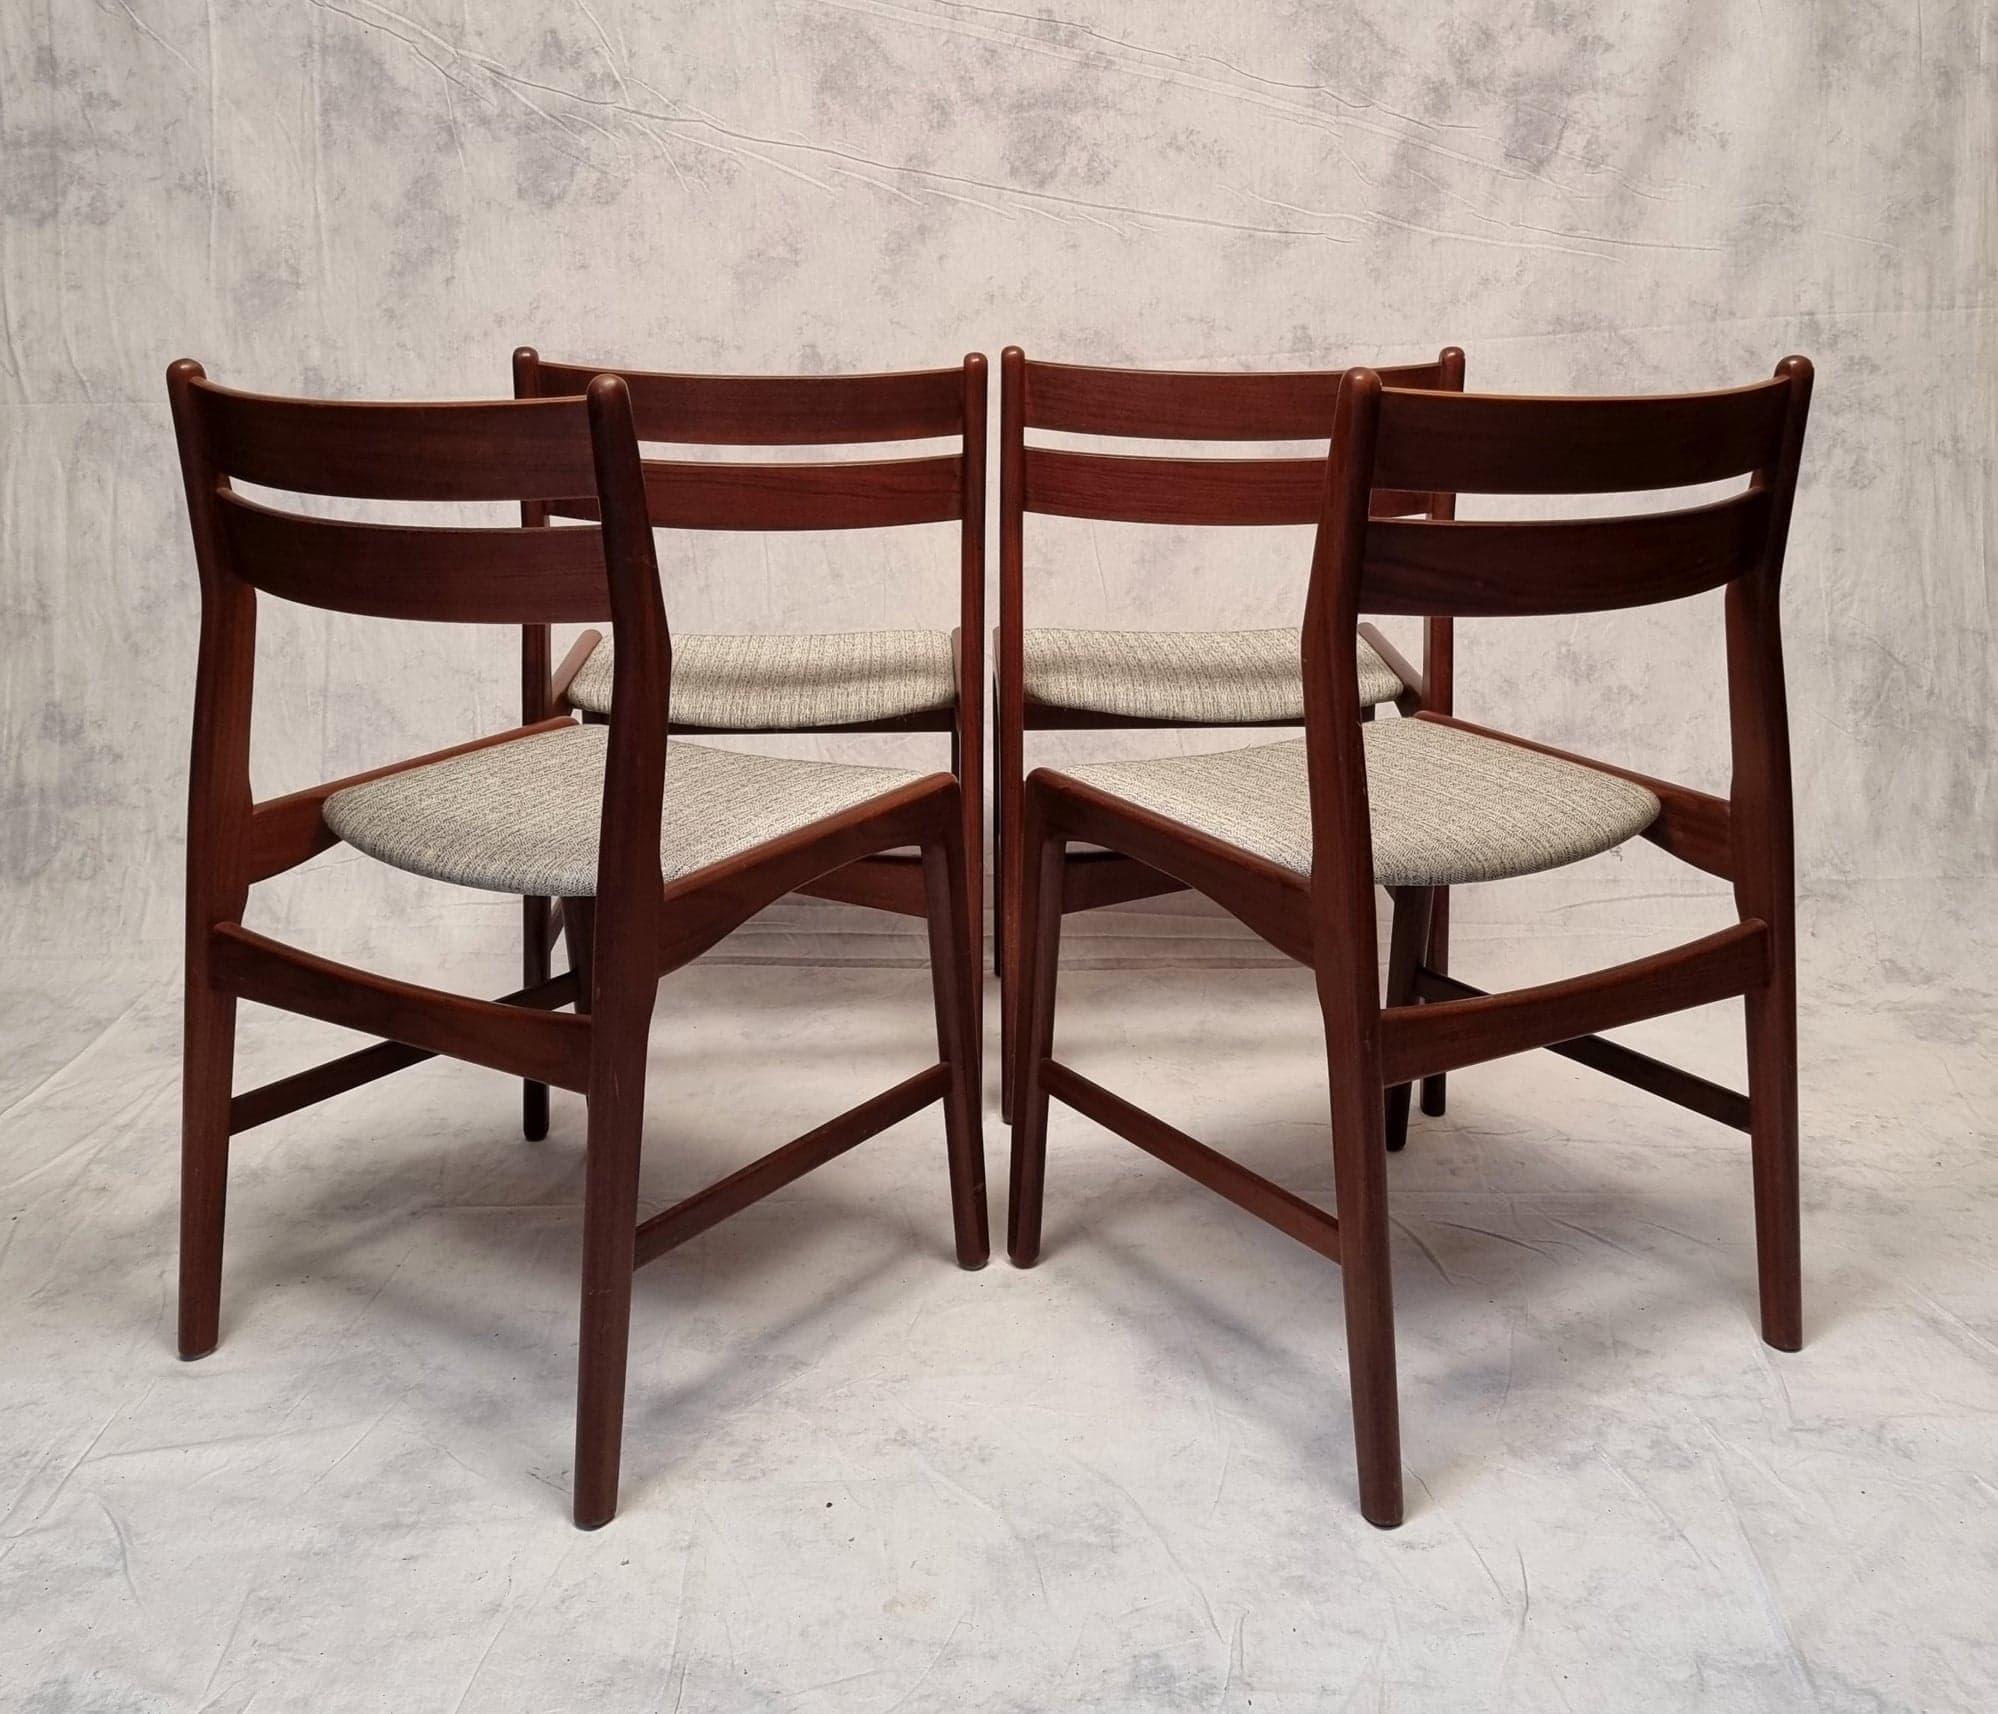 Beautiful set of four Scandinavian teak chairs. Work from the 1960s. The four legs are slightly oblique and are joined by crosspieces. The backrest is perforated and slightly concave to fit the shape of the back and provide increased comfort. The